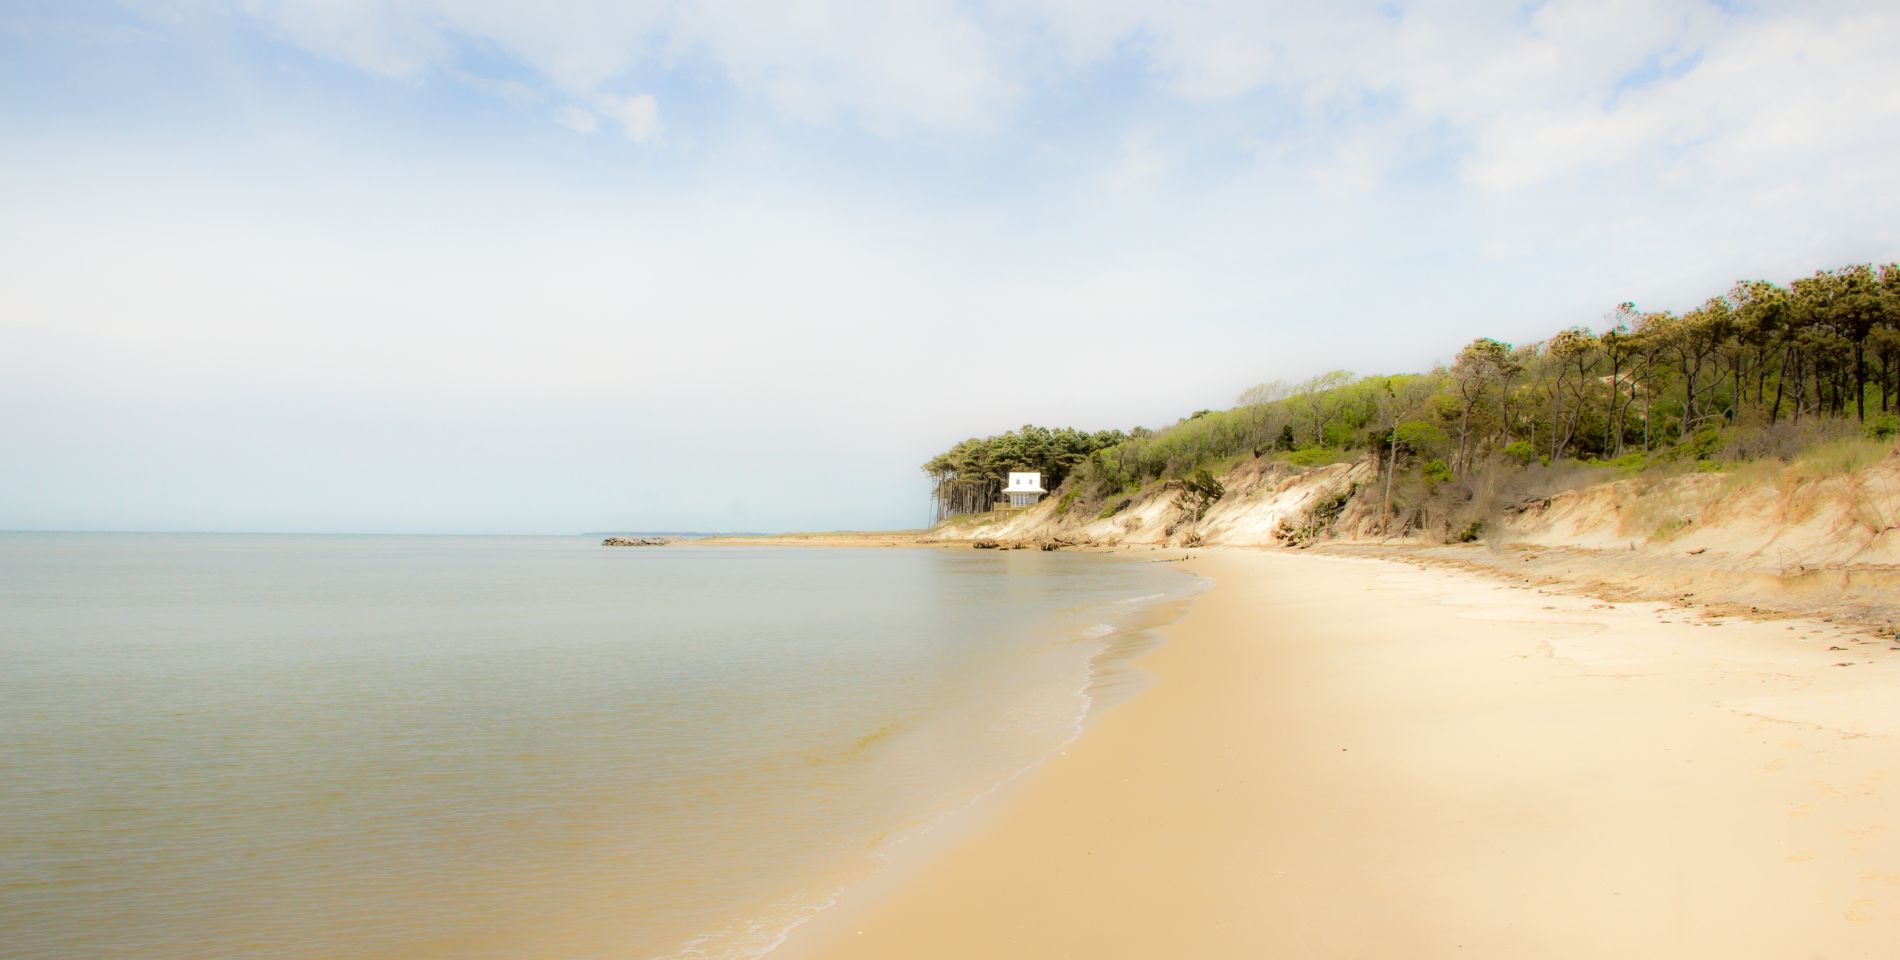 The shoreline at the Savage Neck Dunes Nature Preserve